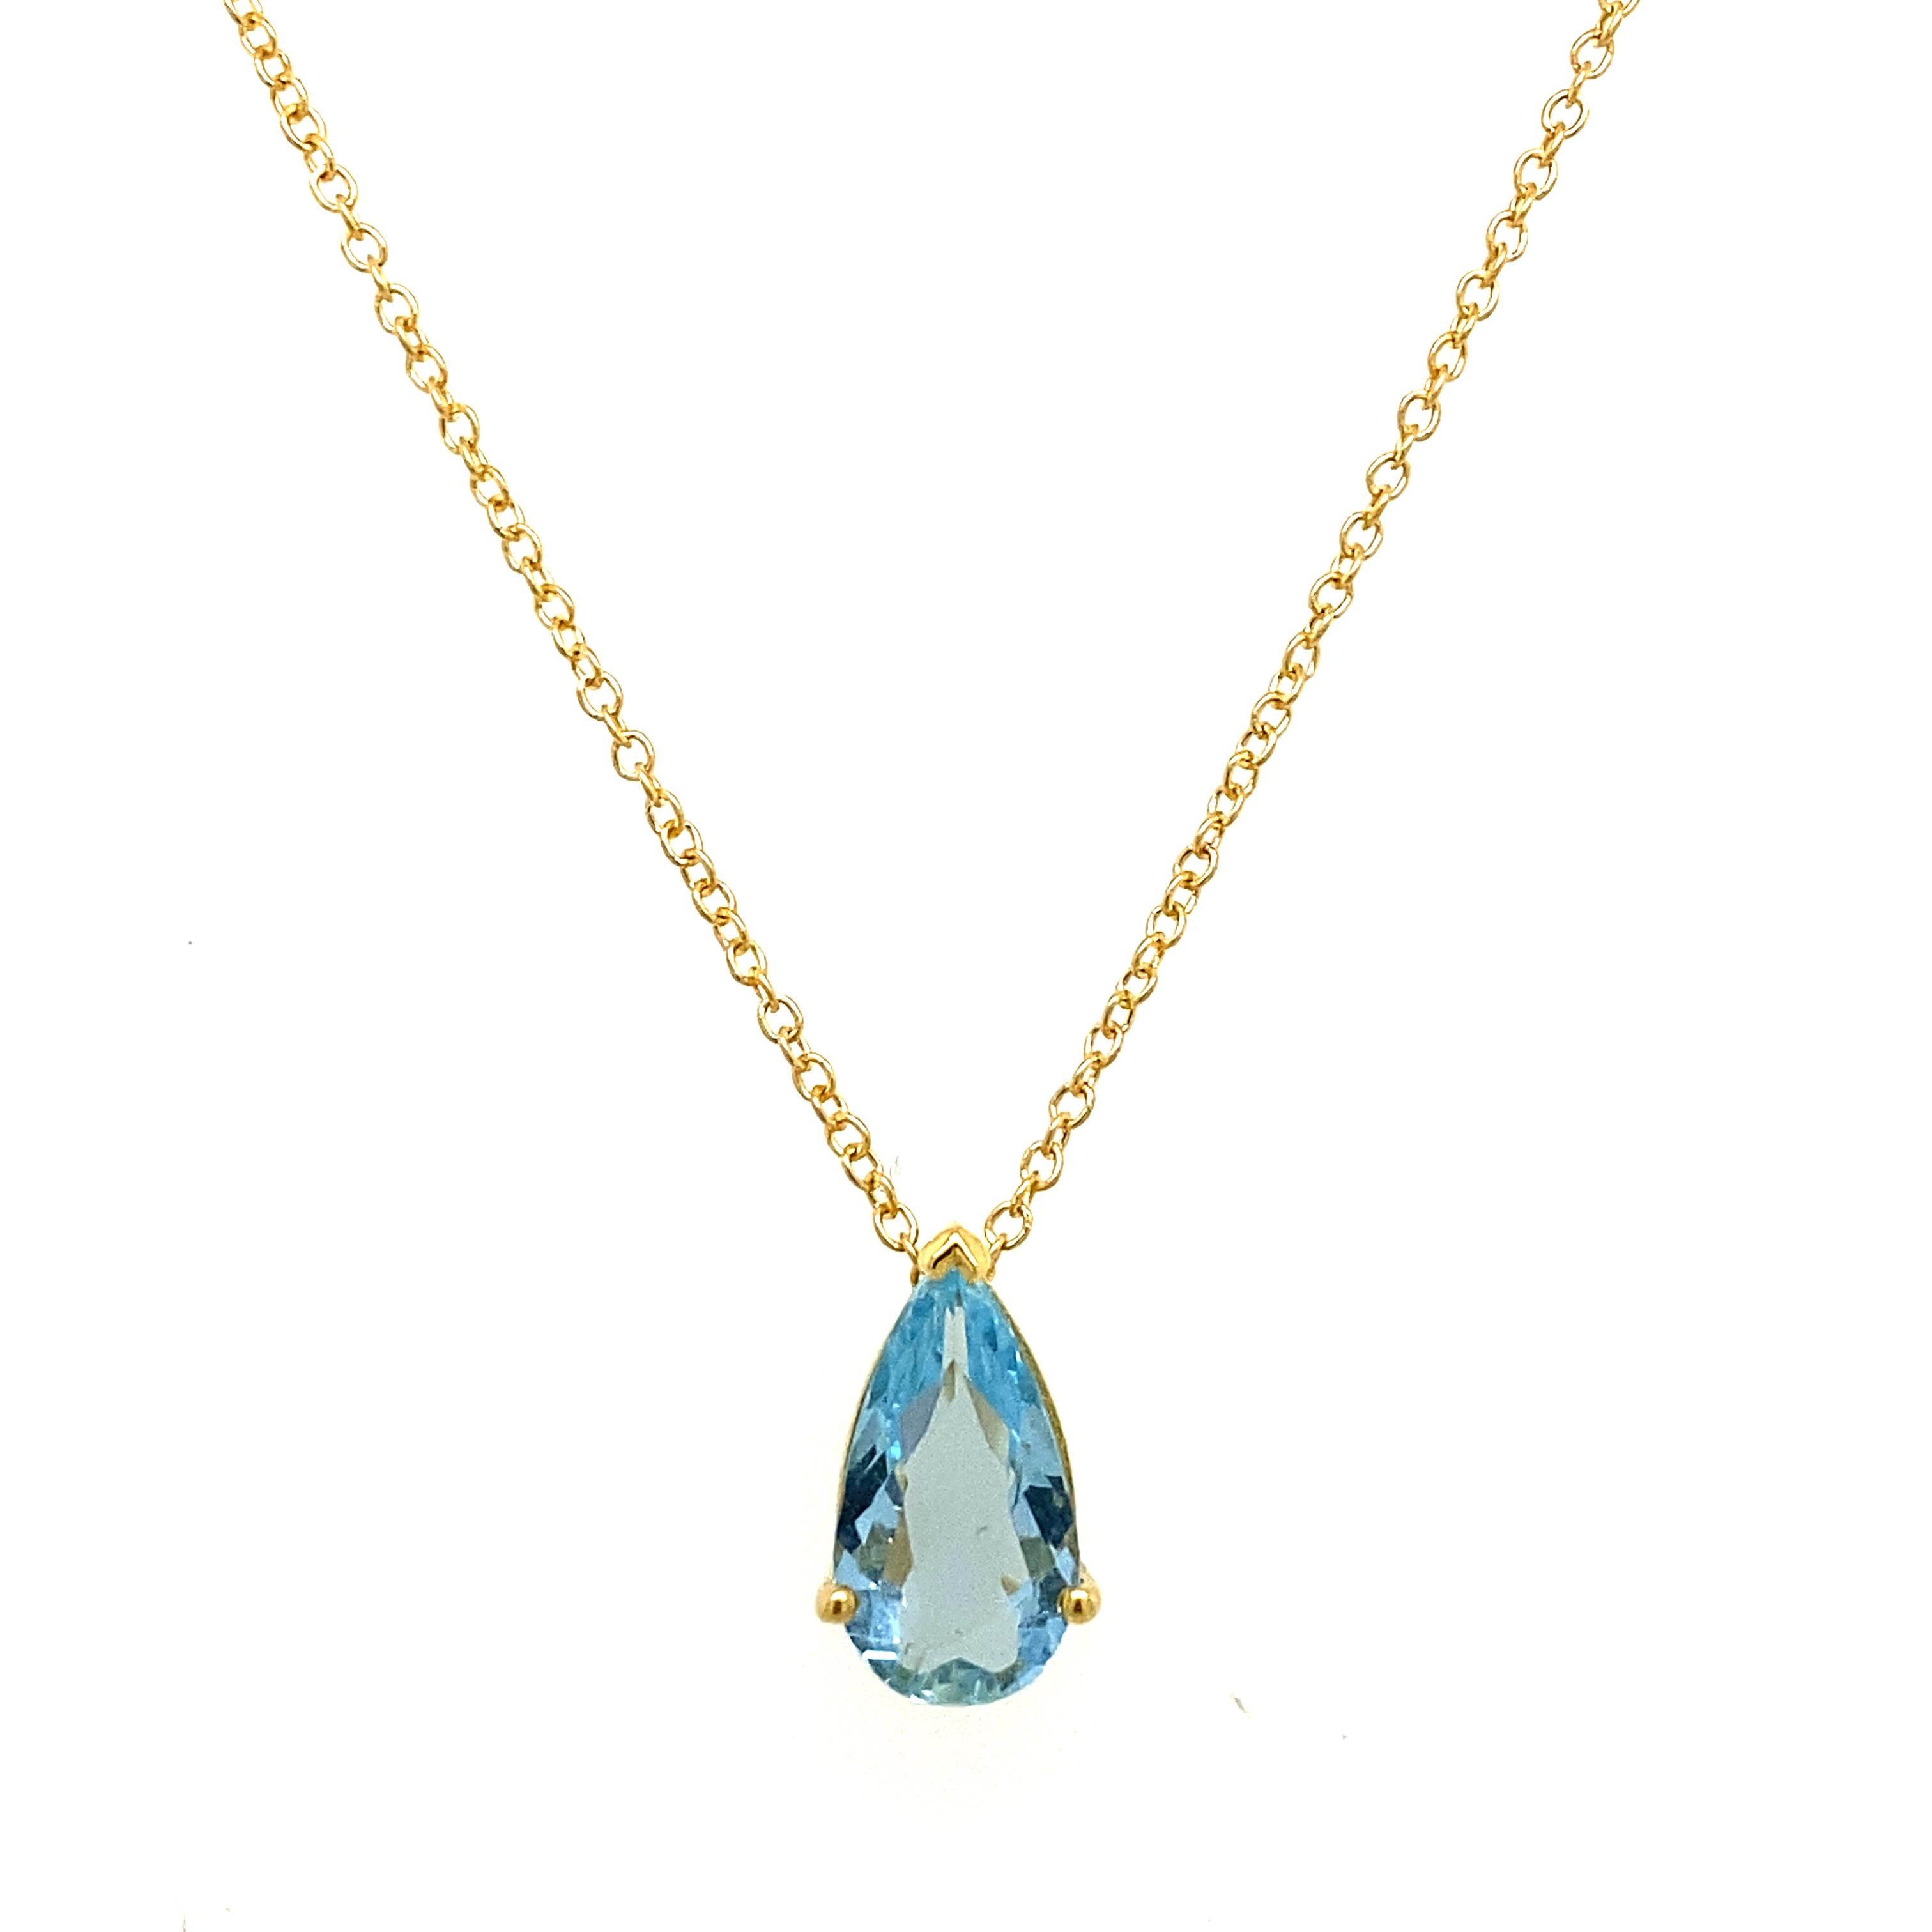 Fine Quality 1.02ct Pear Shape Aquamarine Pendant & 18ct Yellow Gold Chain In New Condition For Sale In London, GB